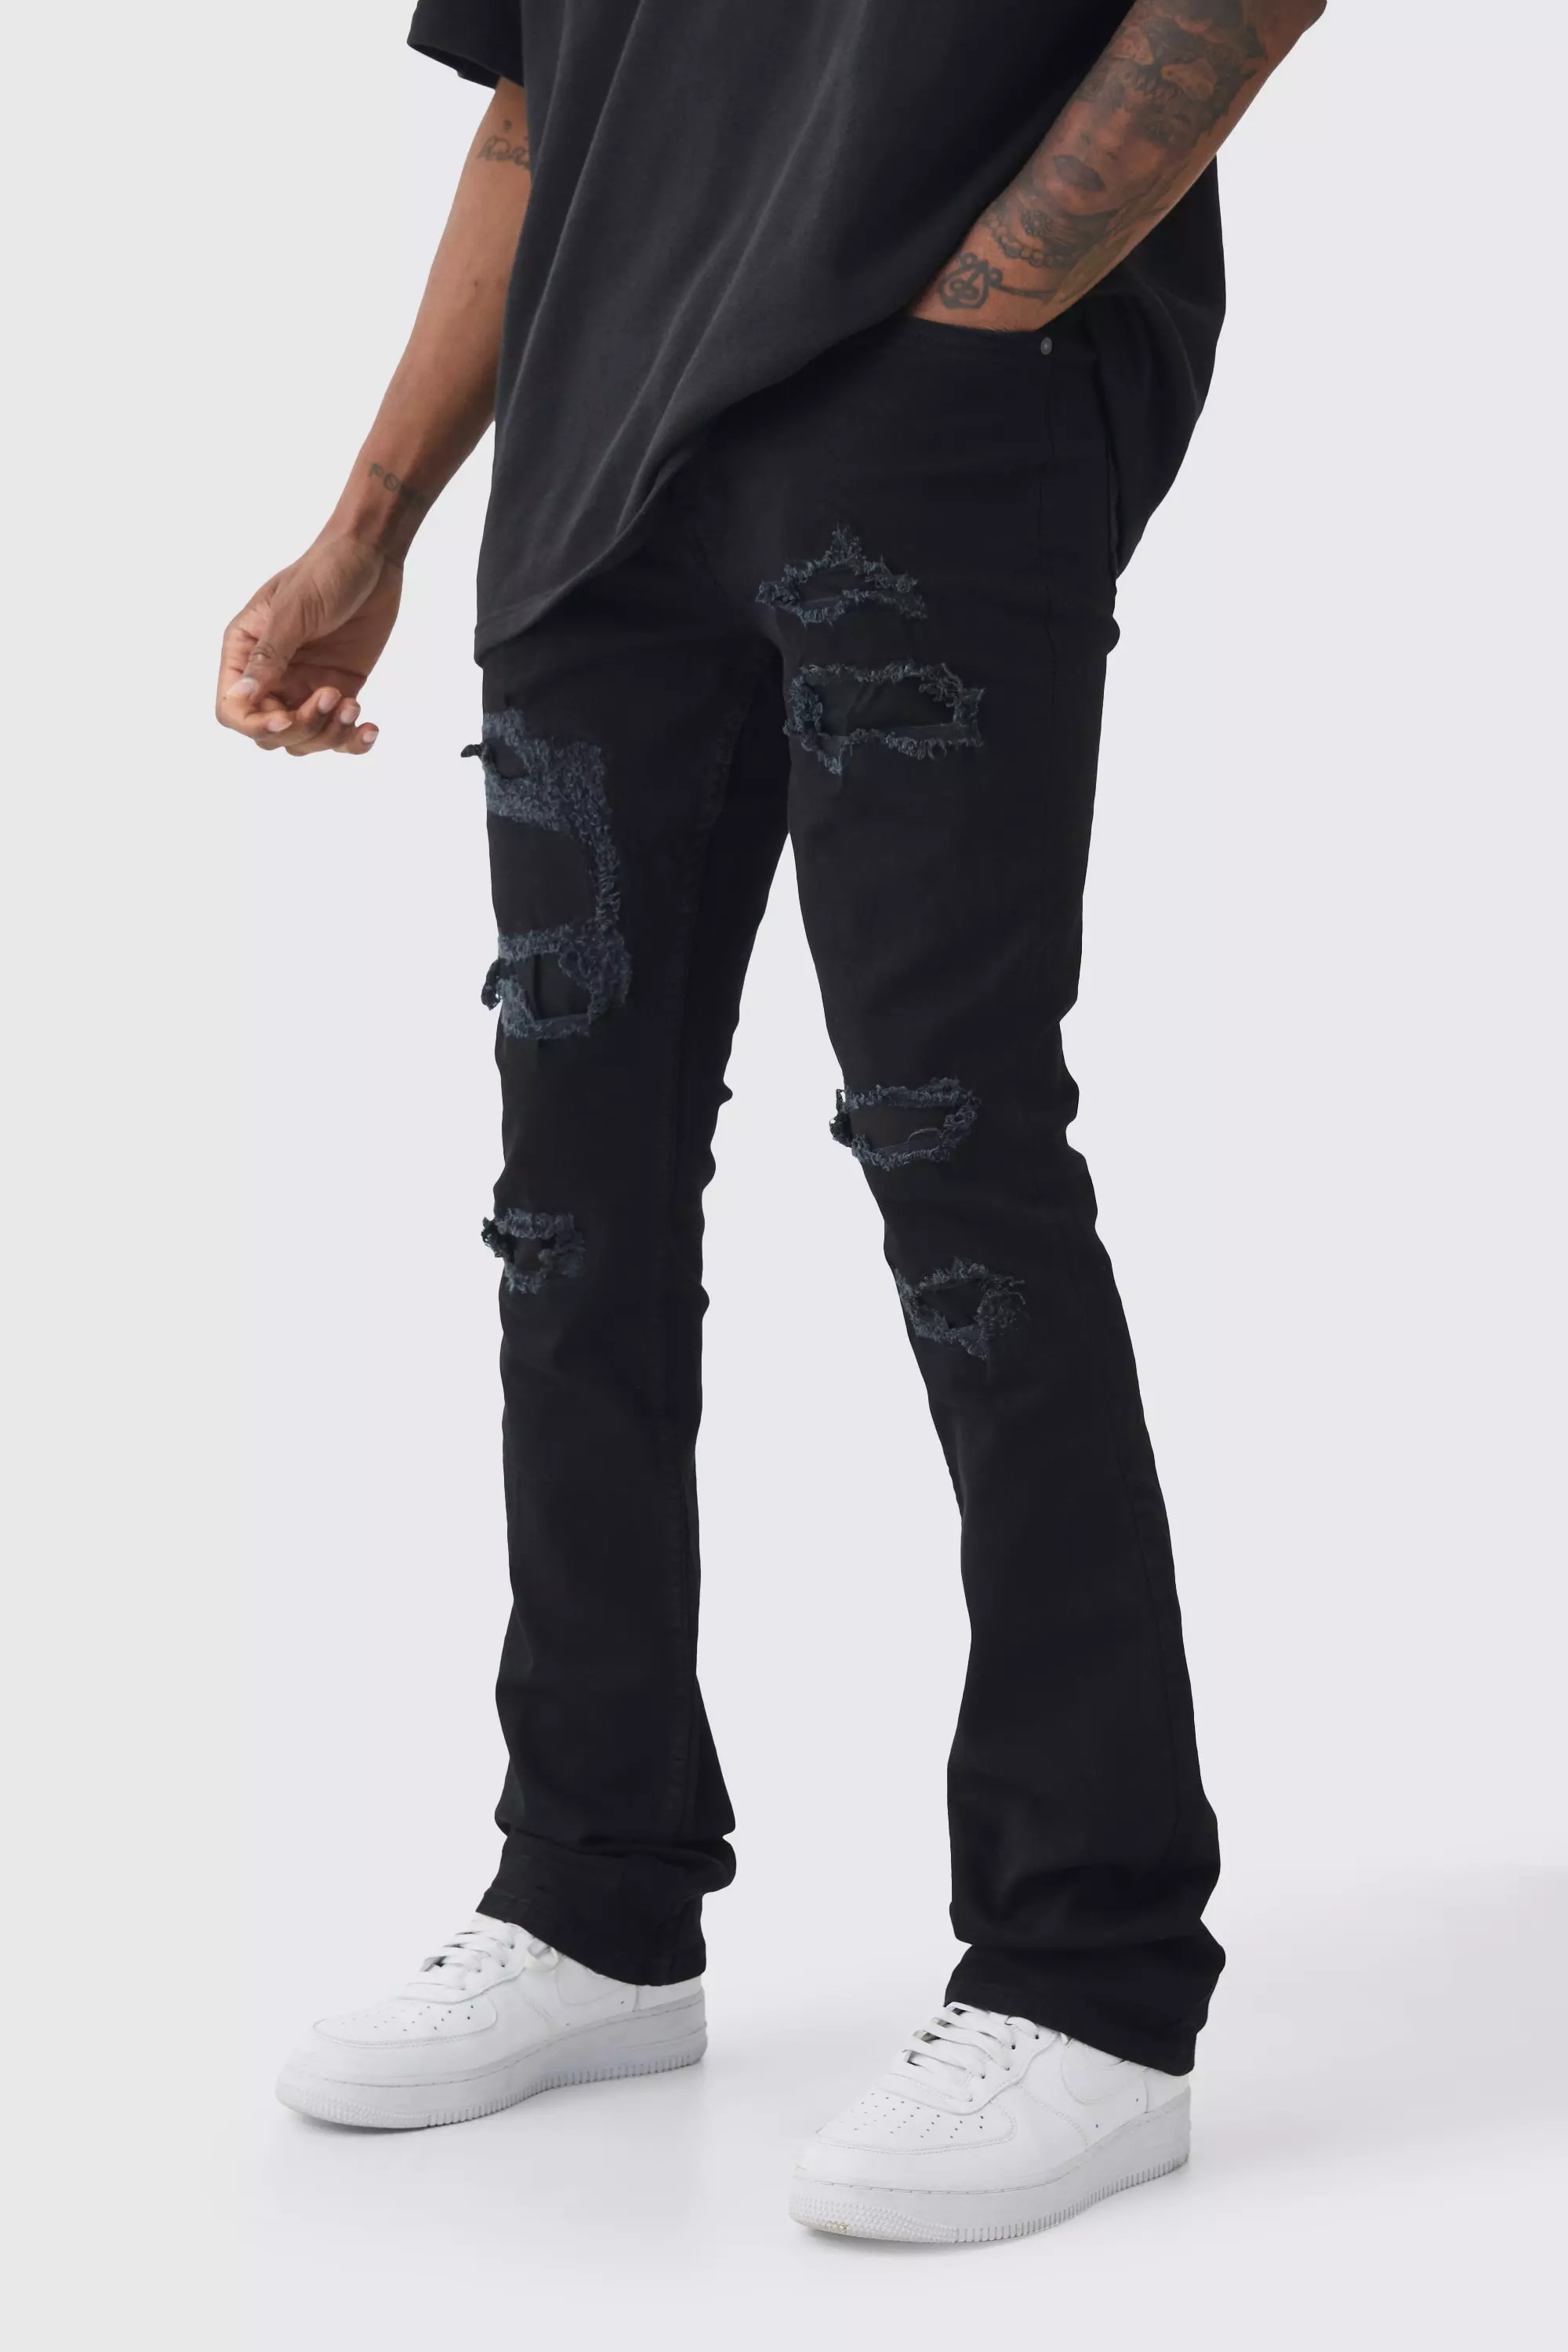 Black Tall Skinny Stacked Distressed Ripped Jeans